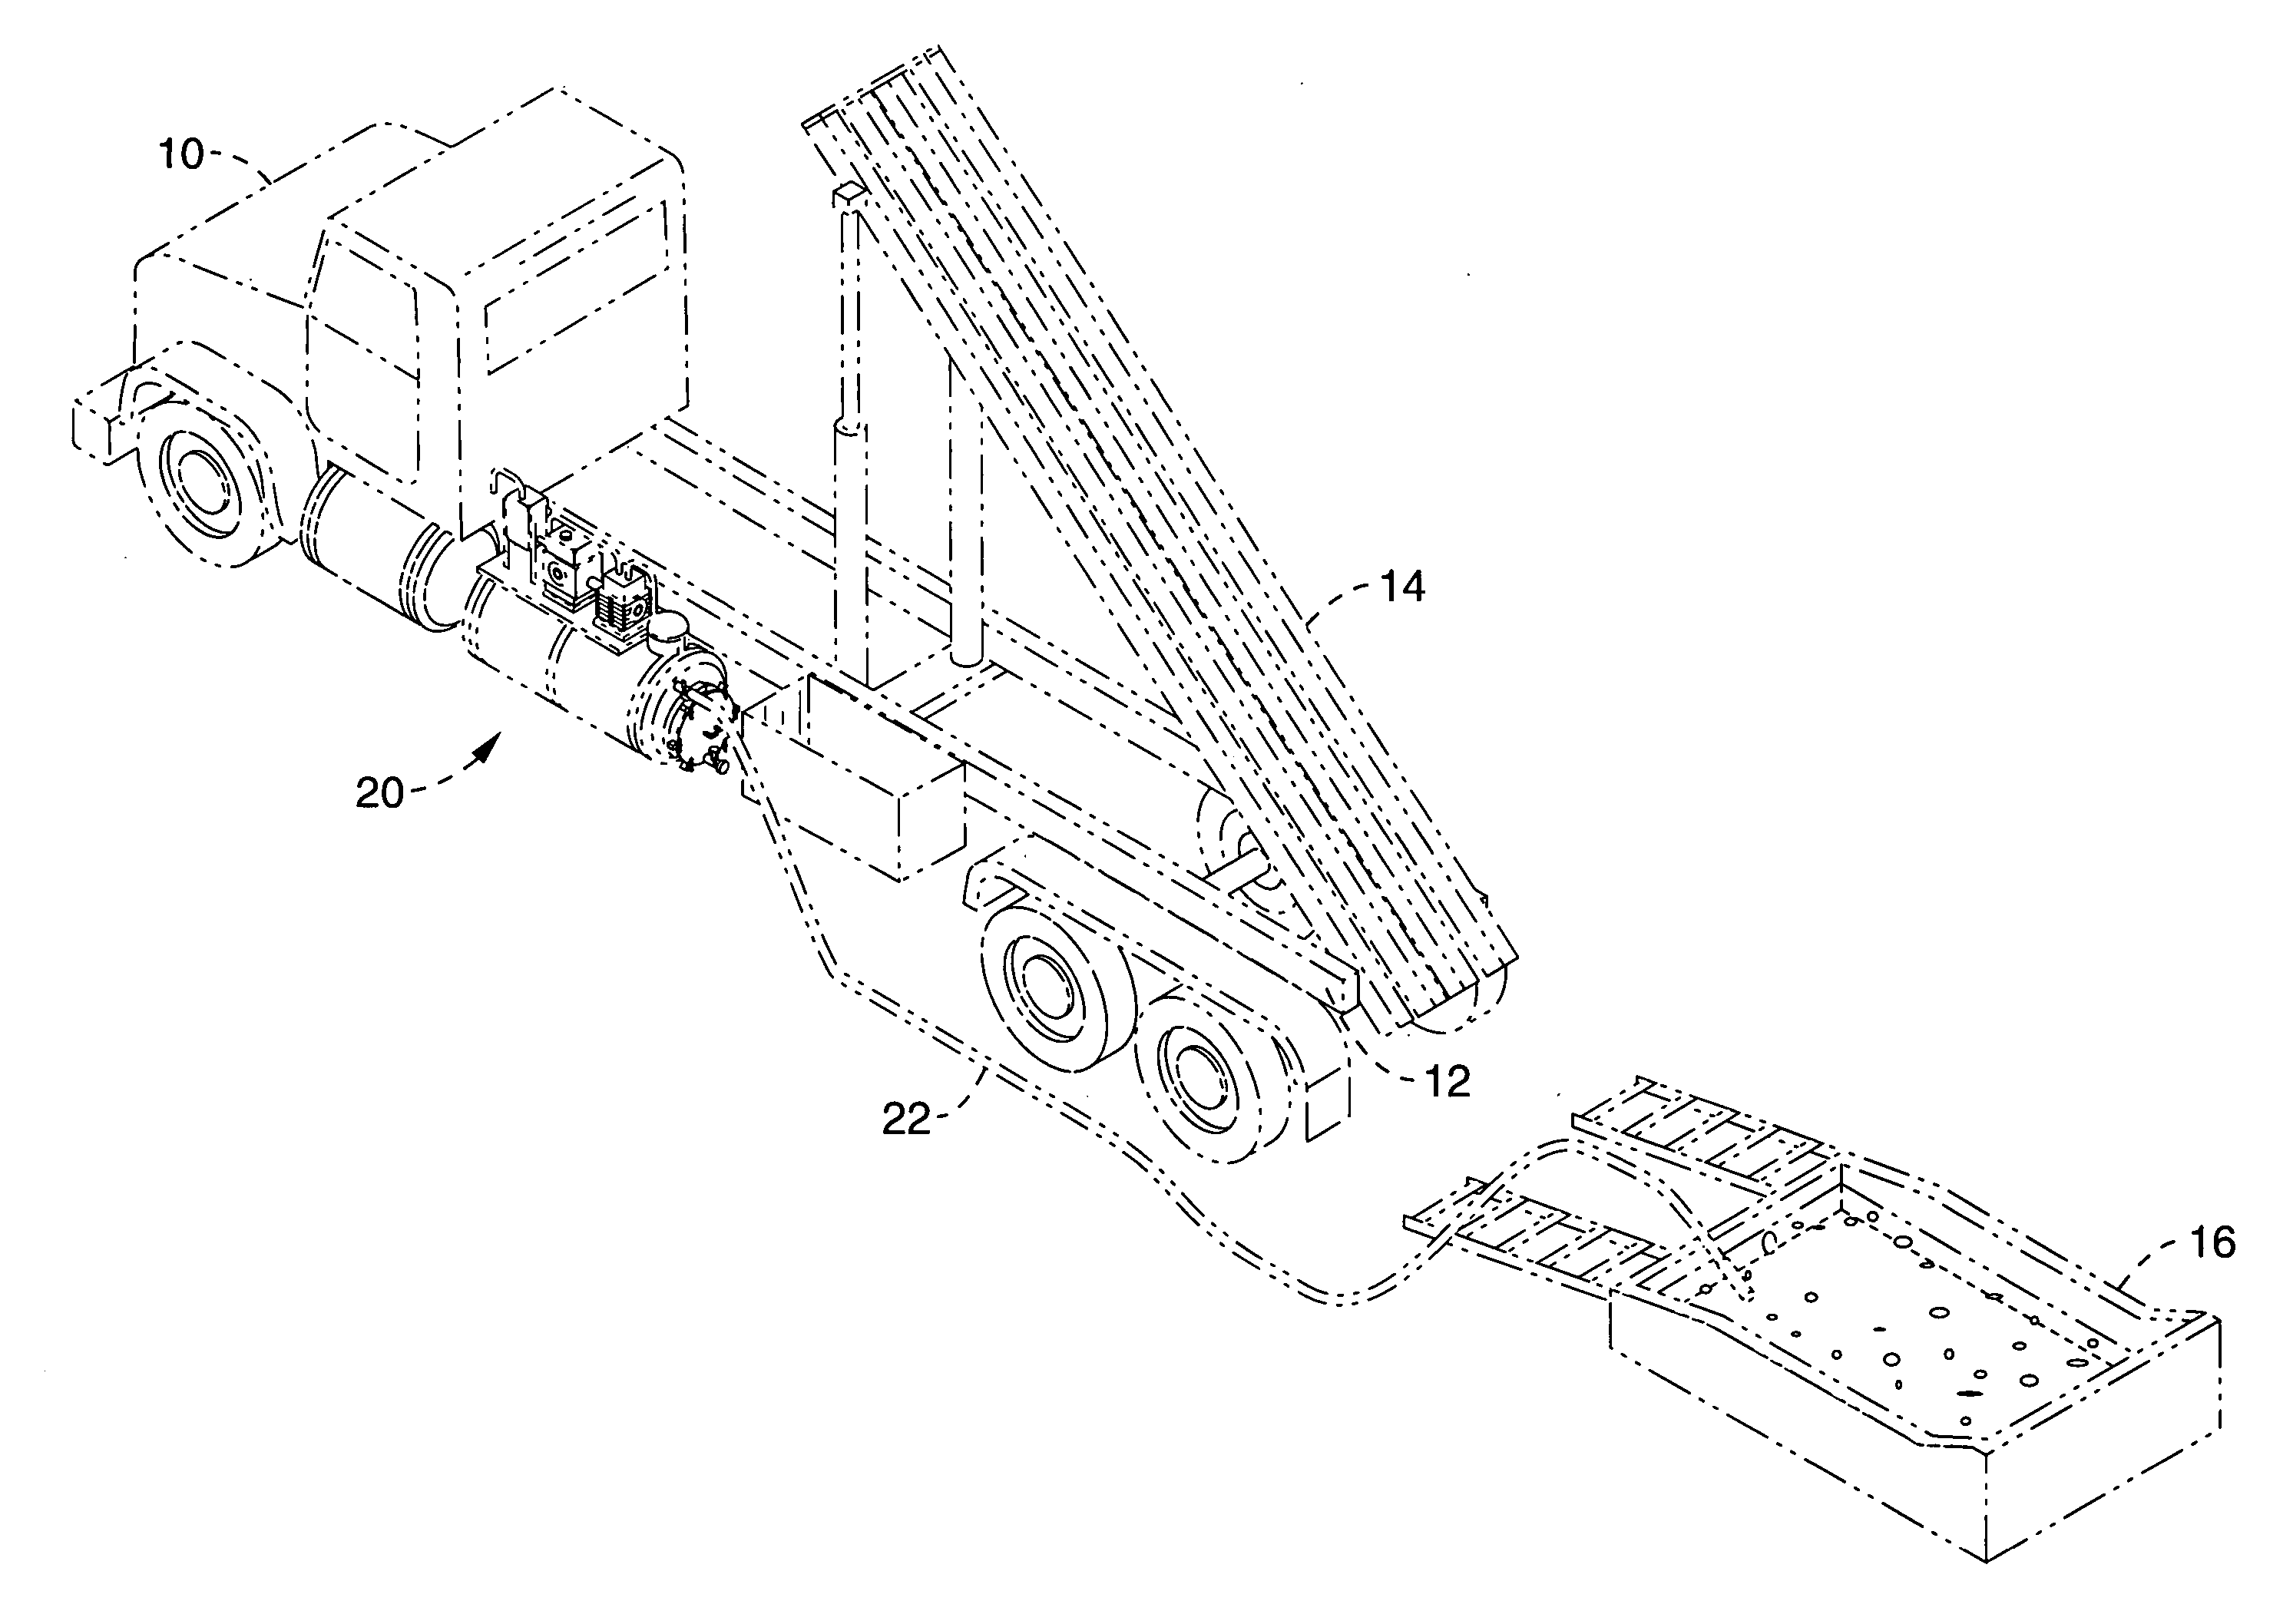 Treatment system and method for liquid concrete washout waste